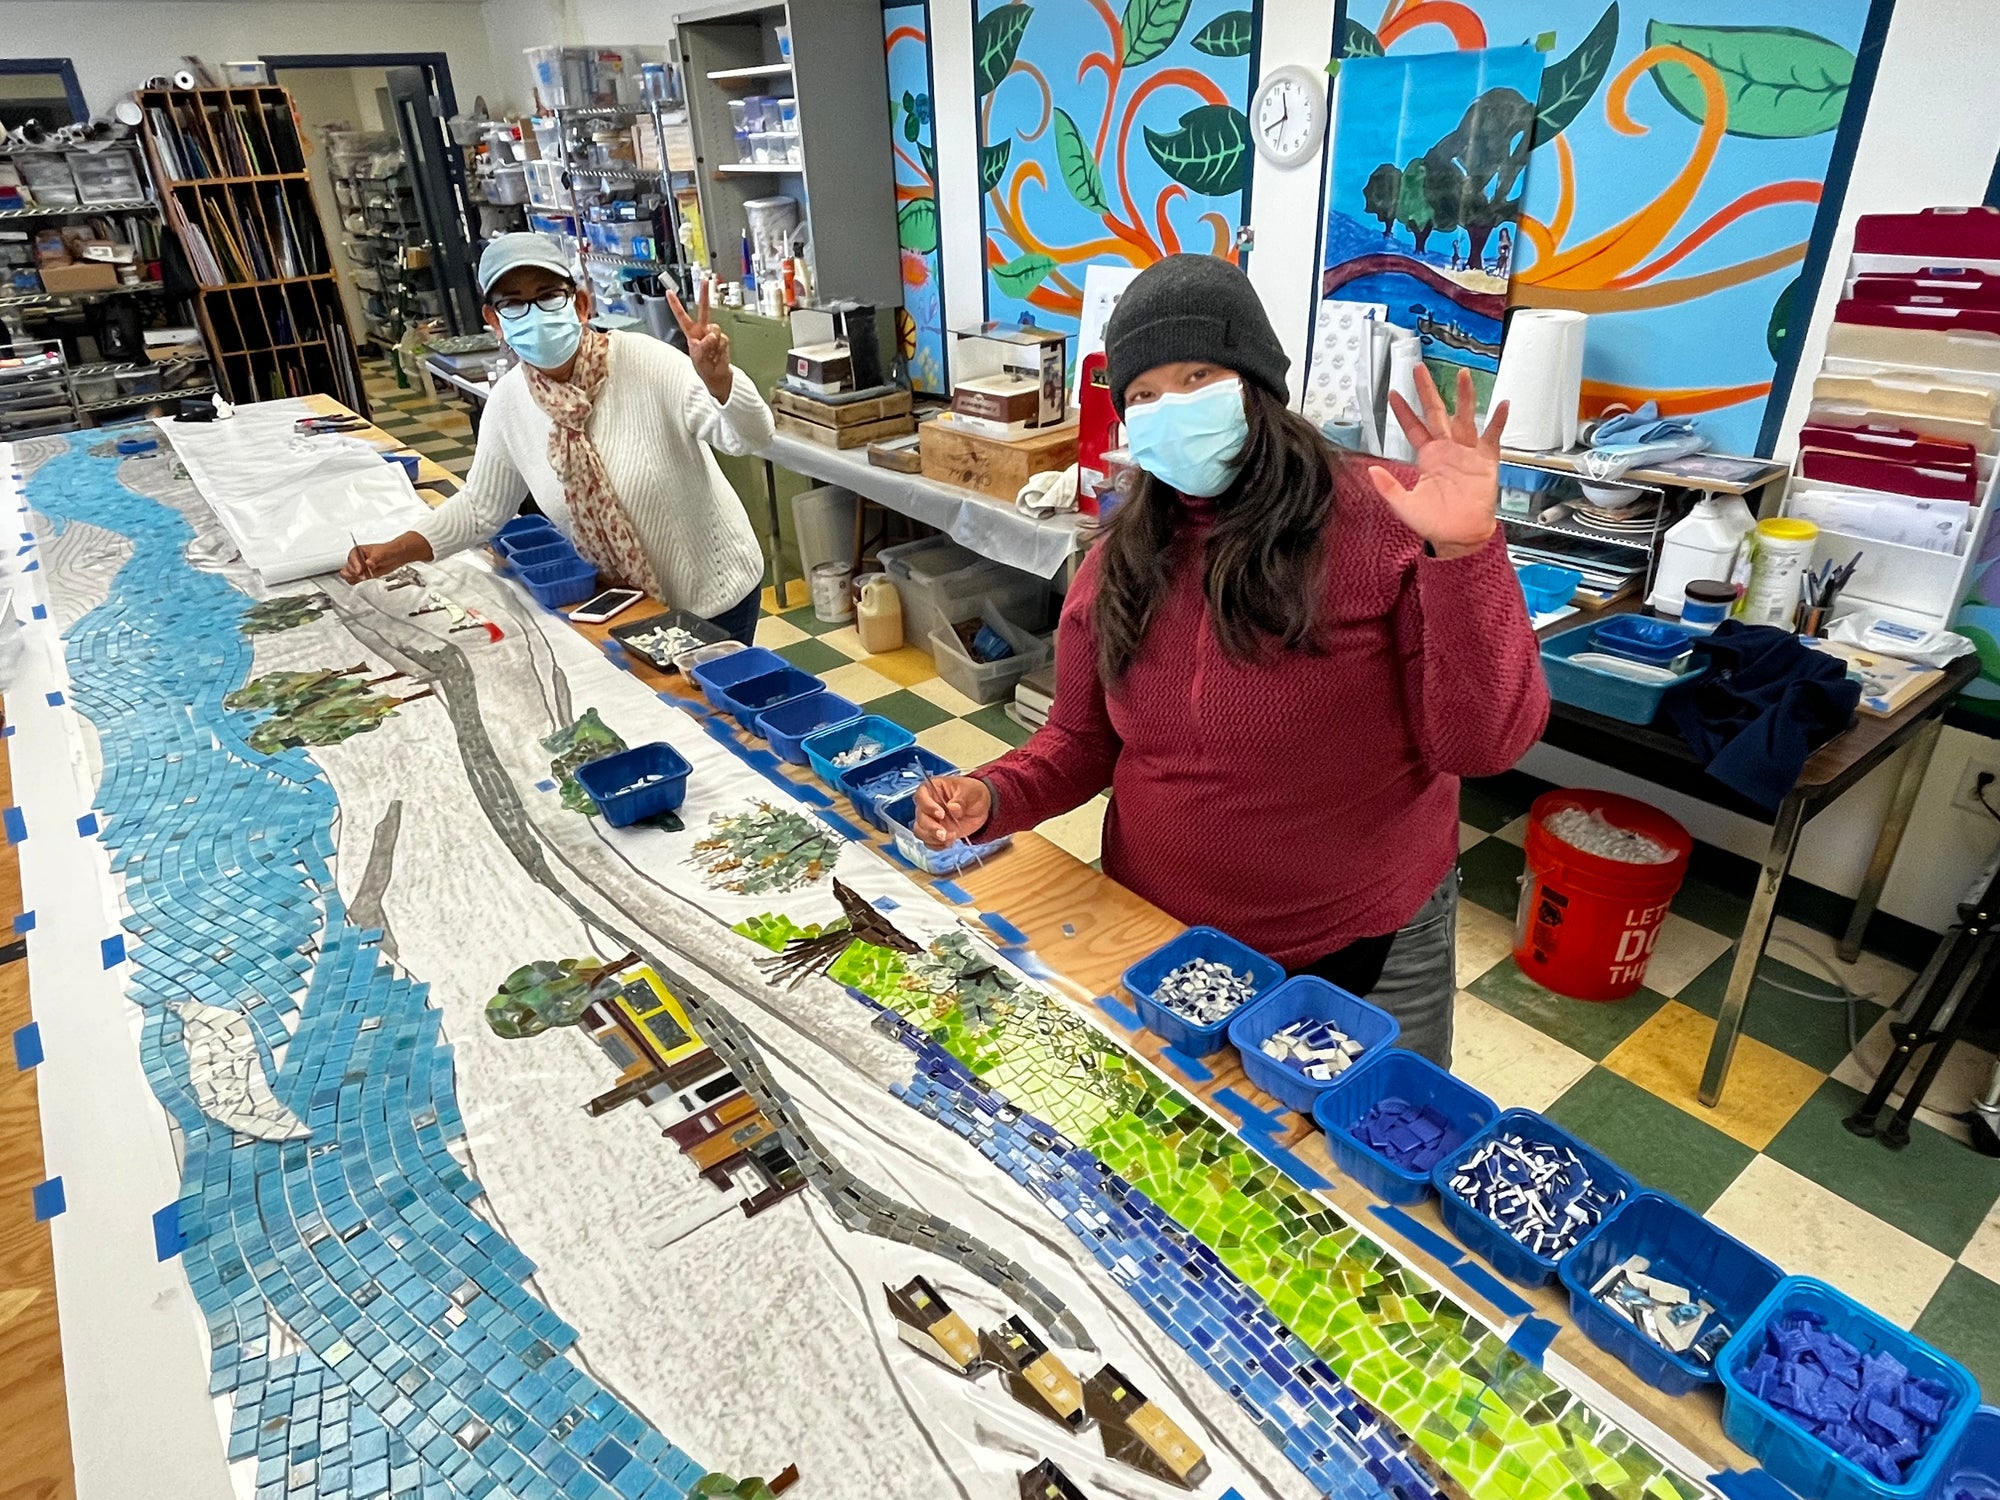 Artists working on a large-scale mosaic and waving to the camera.